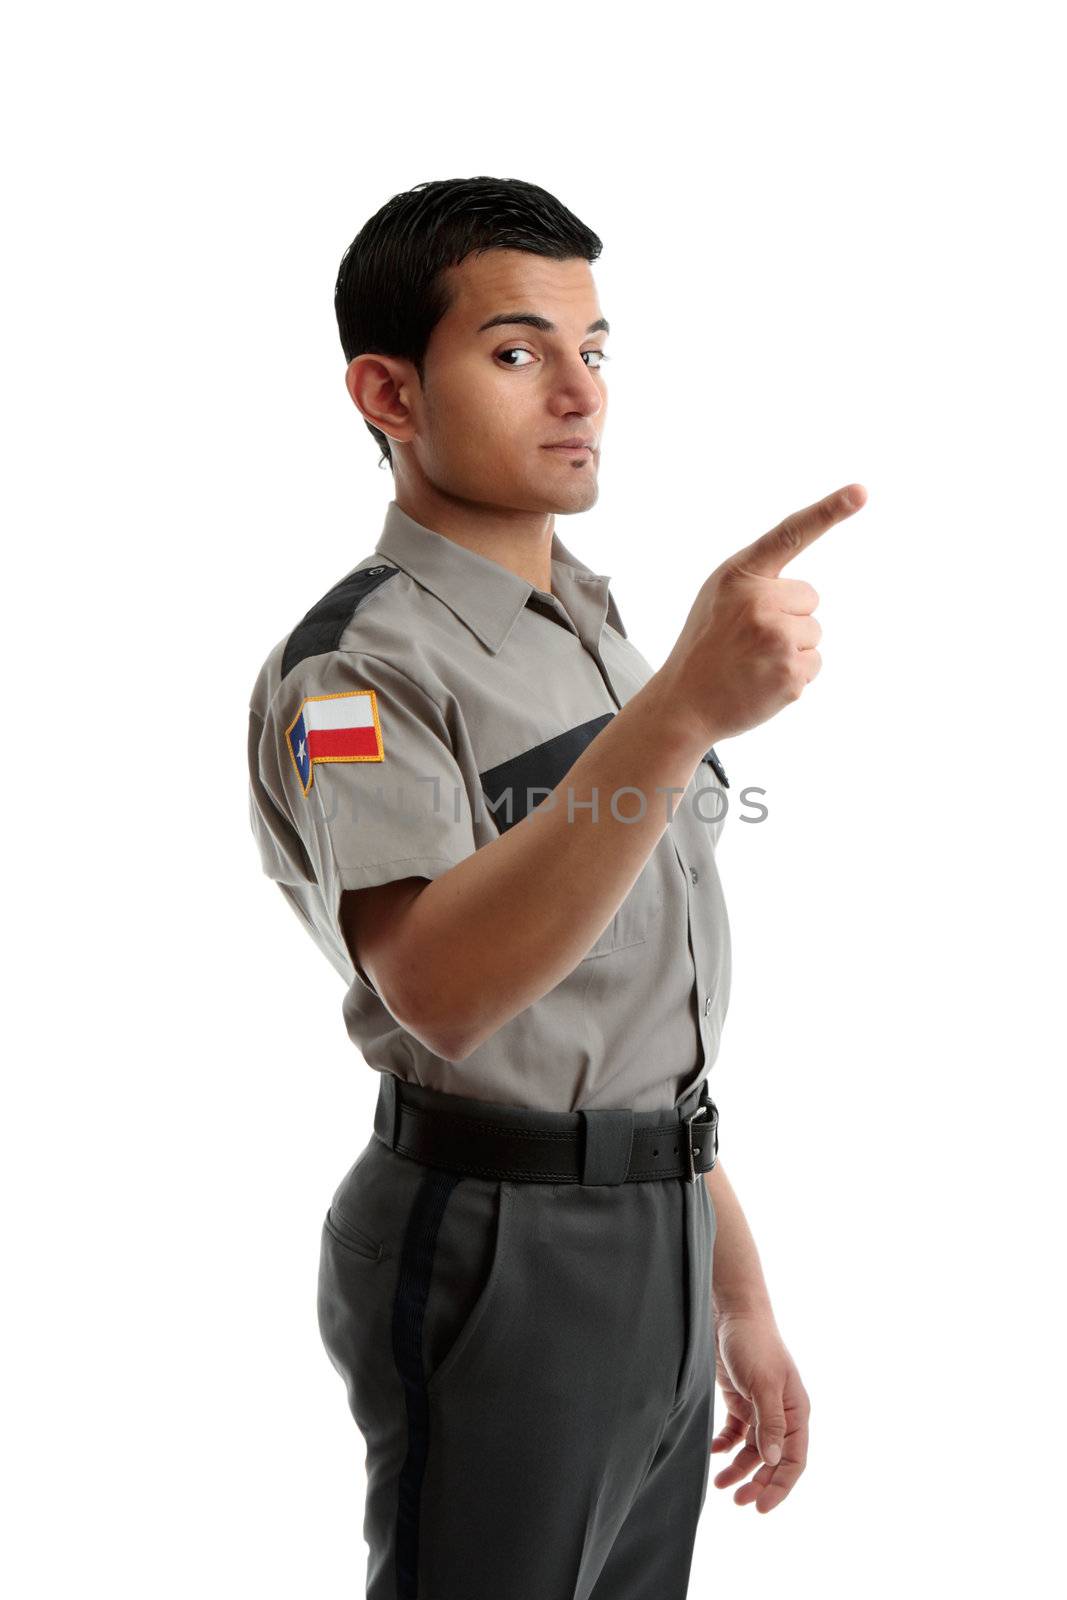 A security guard, prison warden or other uniformed man pointing his finger at your message.  White background.